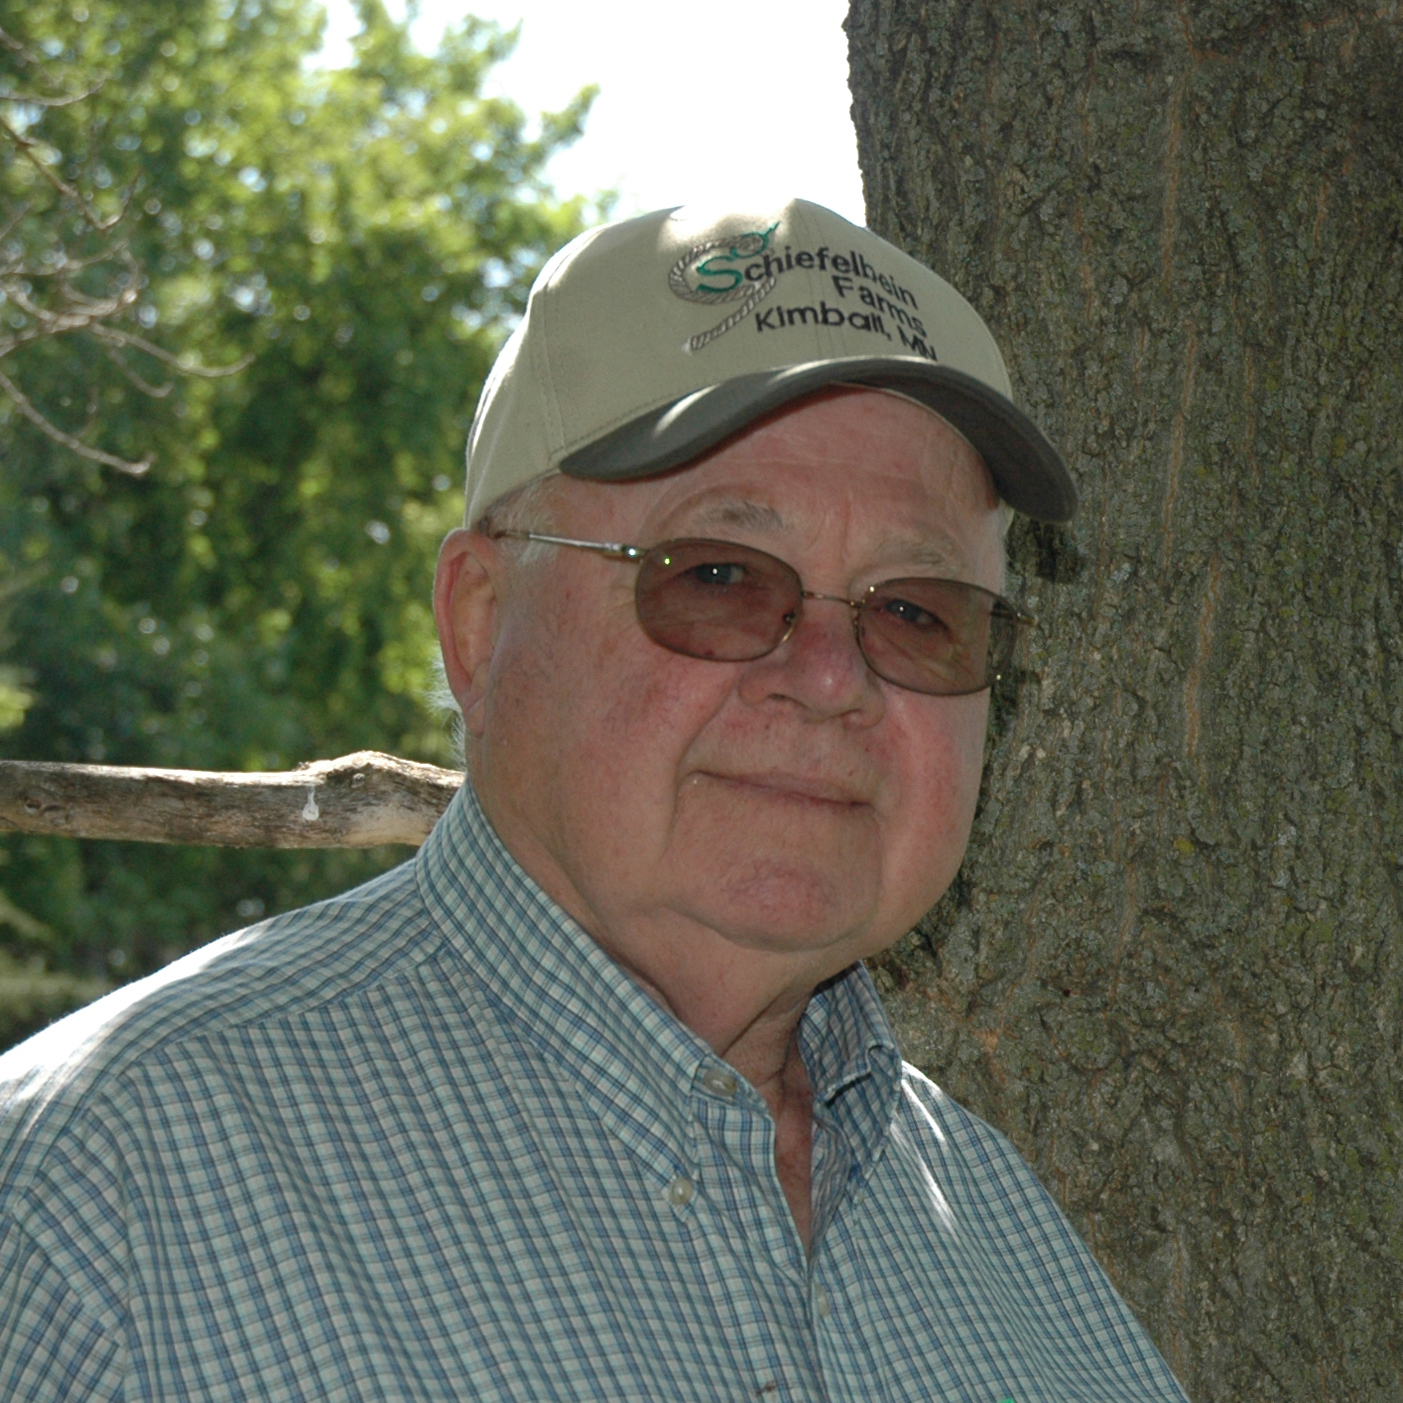 frank schiefelbein standing in front of tree with schiefelbein farms hat